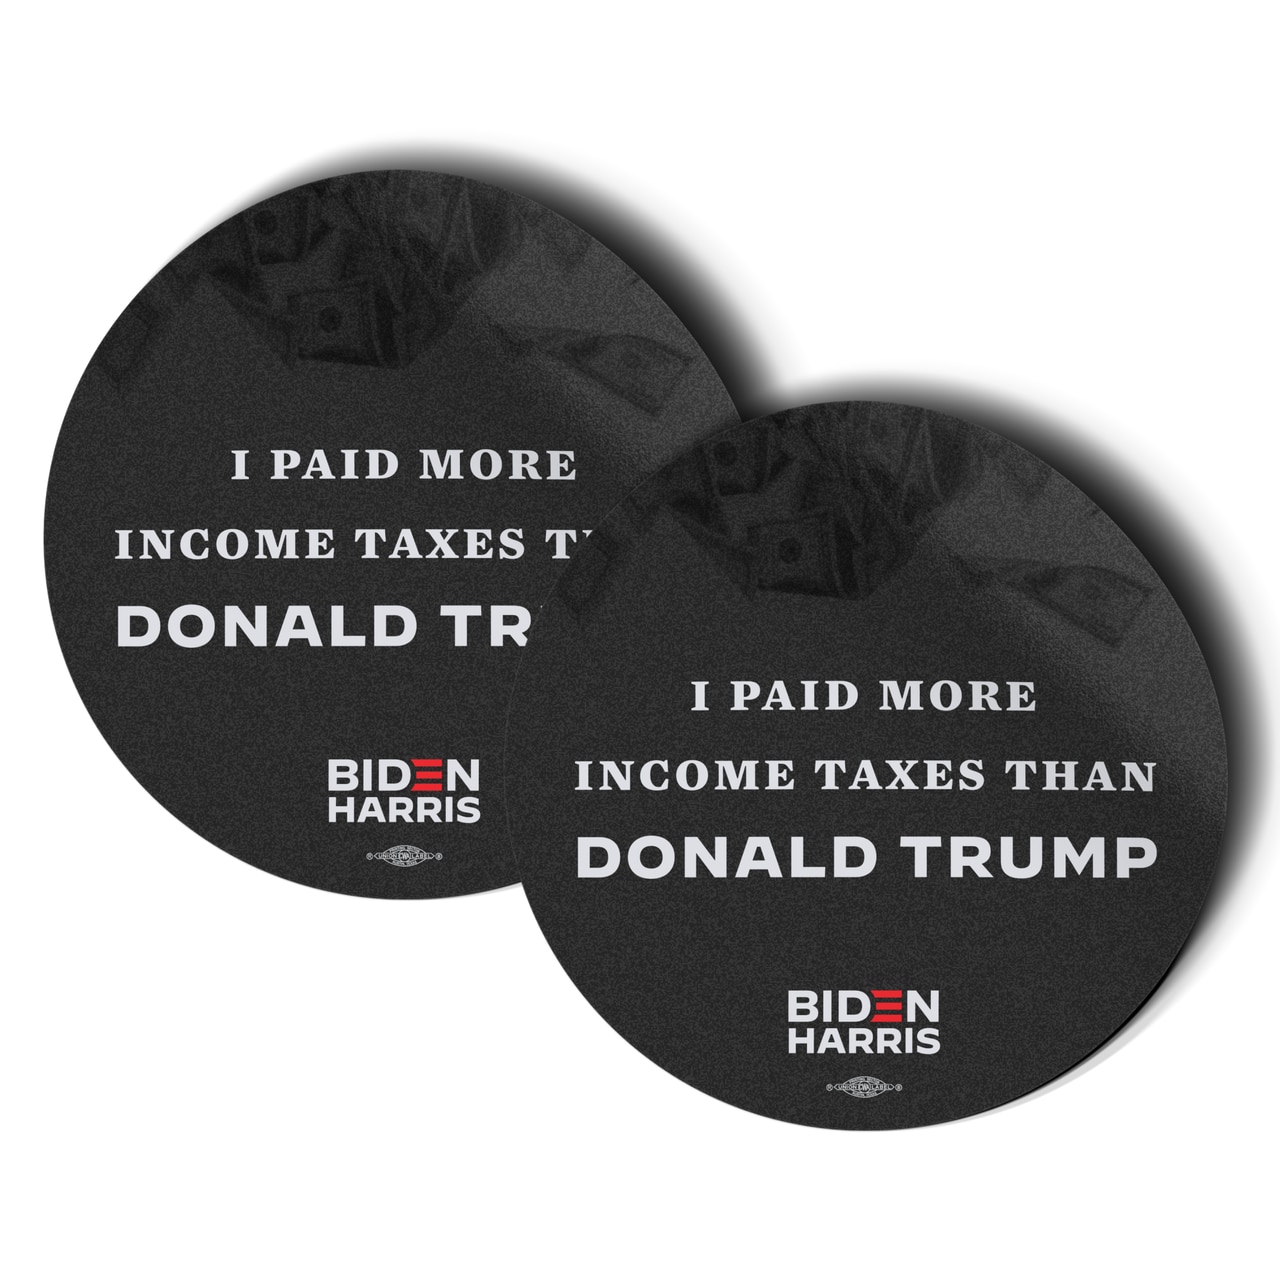 I Paid More In Taxes Than Donald Trump Vinyl Stickers 2-Pack - $7.50 ** Made-In-USA **